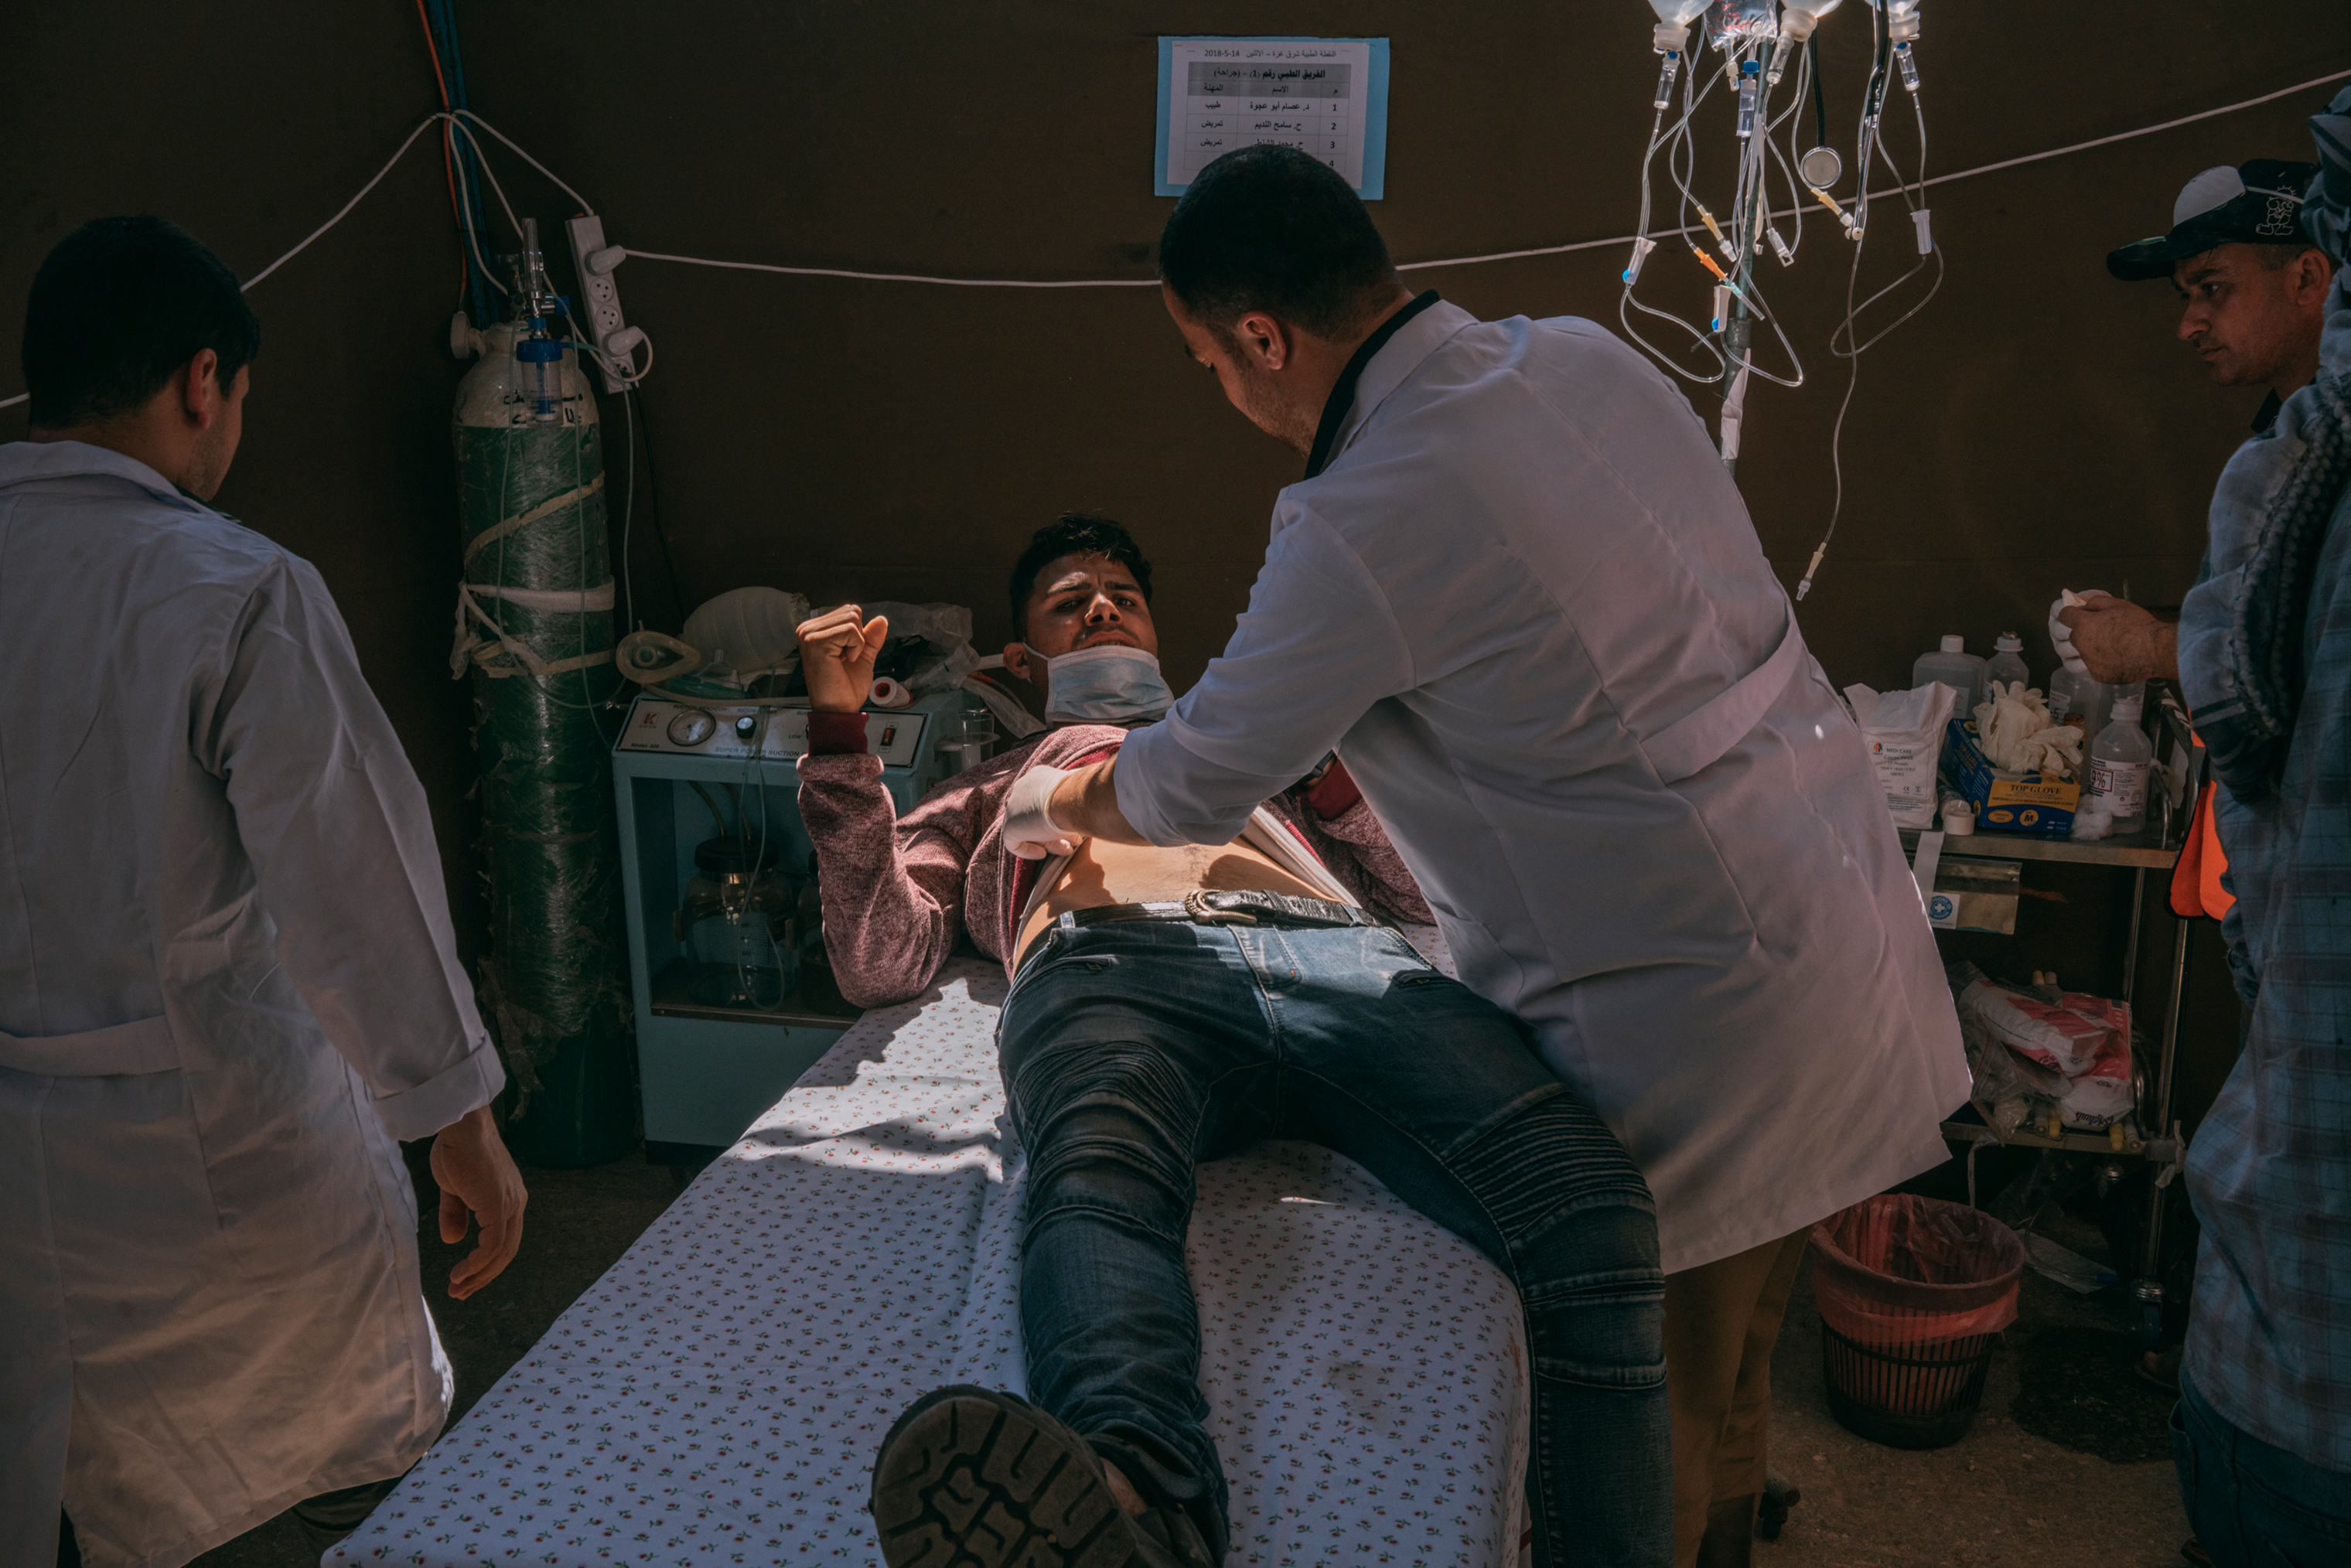 An injured man is assisted by medics in a field hospital set up along the Gaza-Israel border. (Emanuele Satolli for TIME)